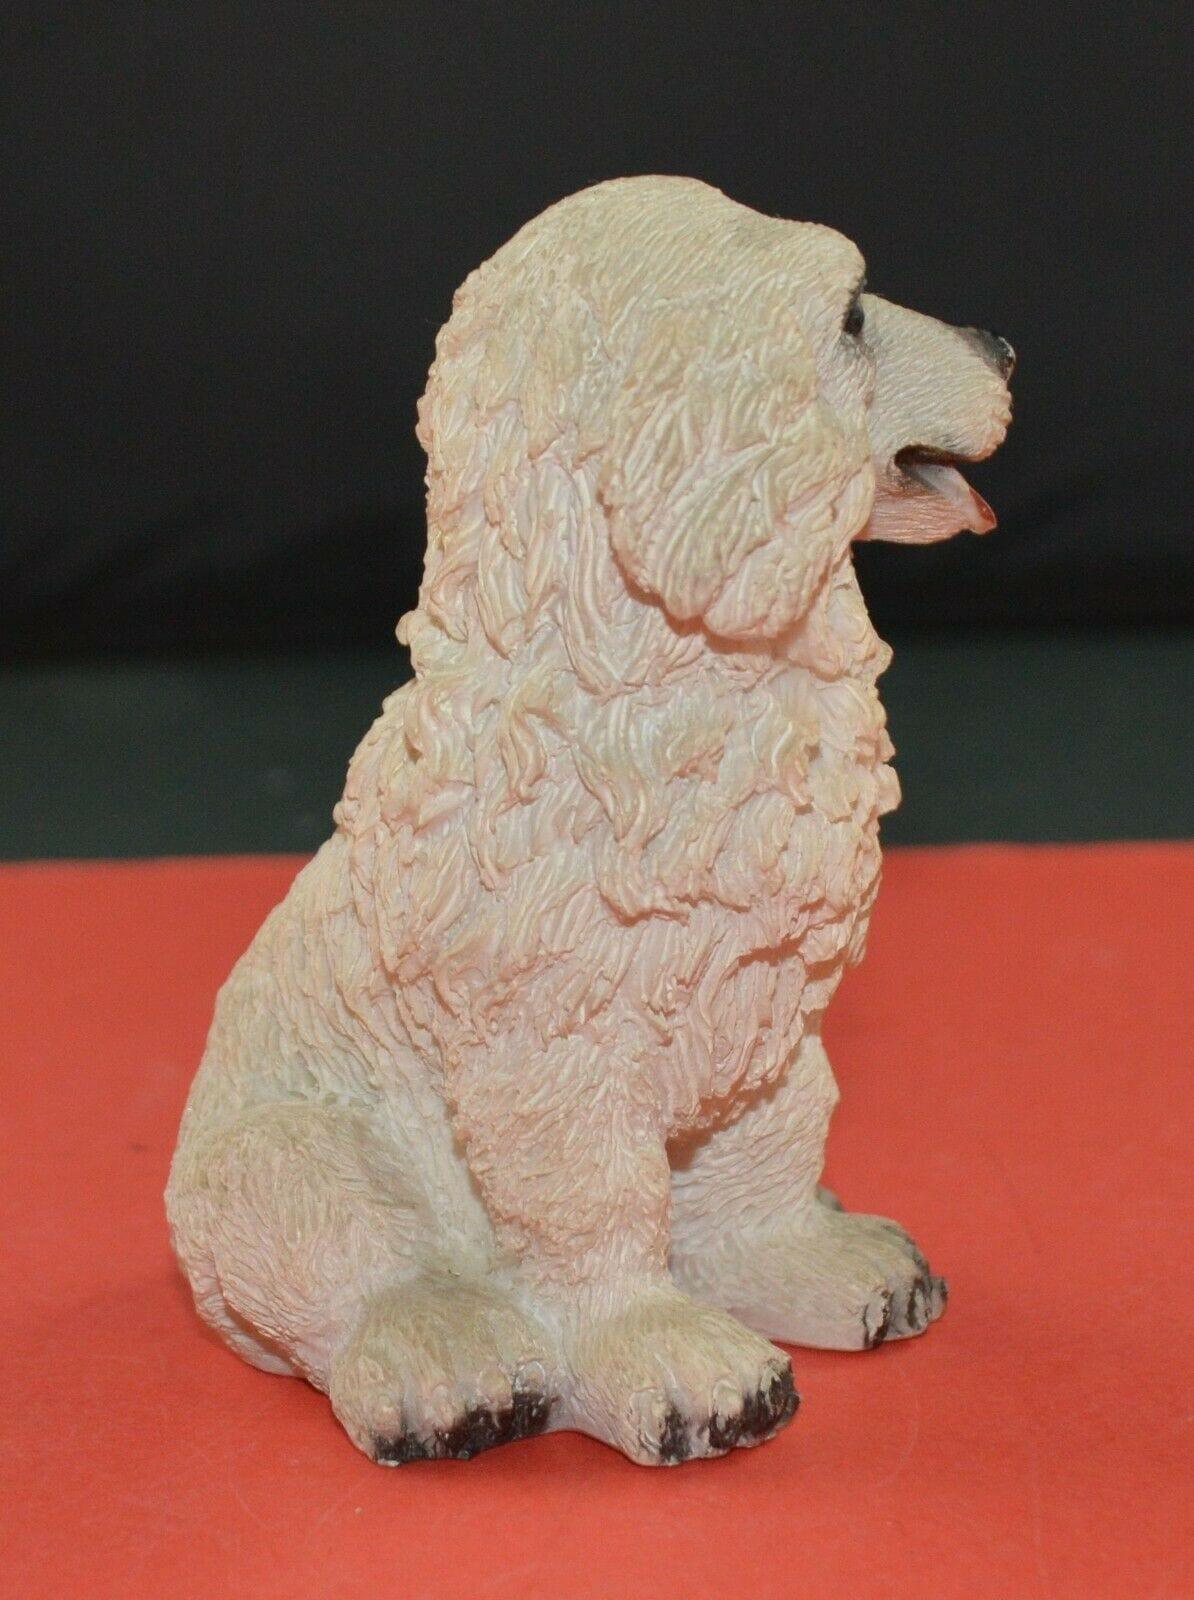 TWO DOG FIGURINES(PREVIOUSLY OWNED) GOOD CONDITION - TMD167207